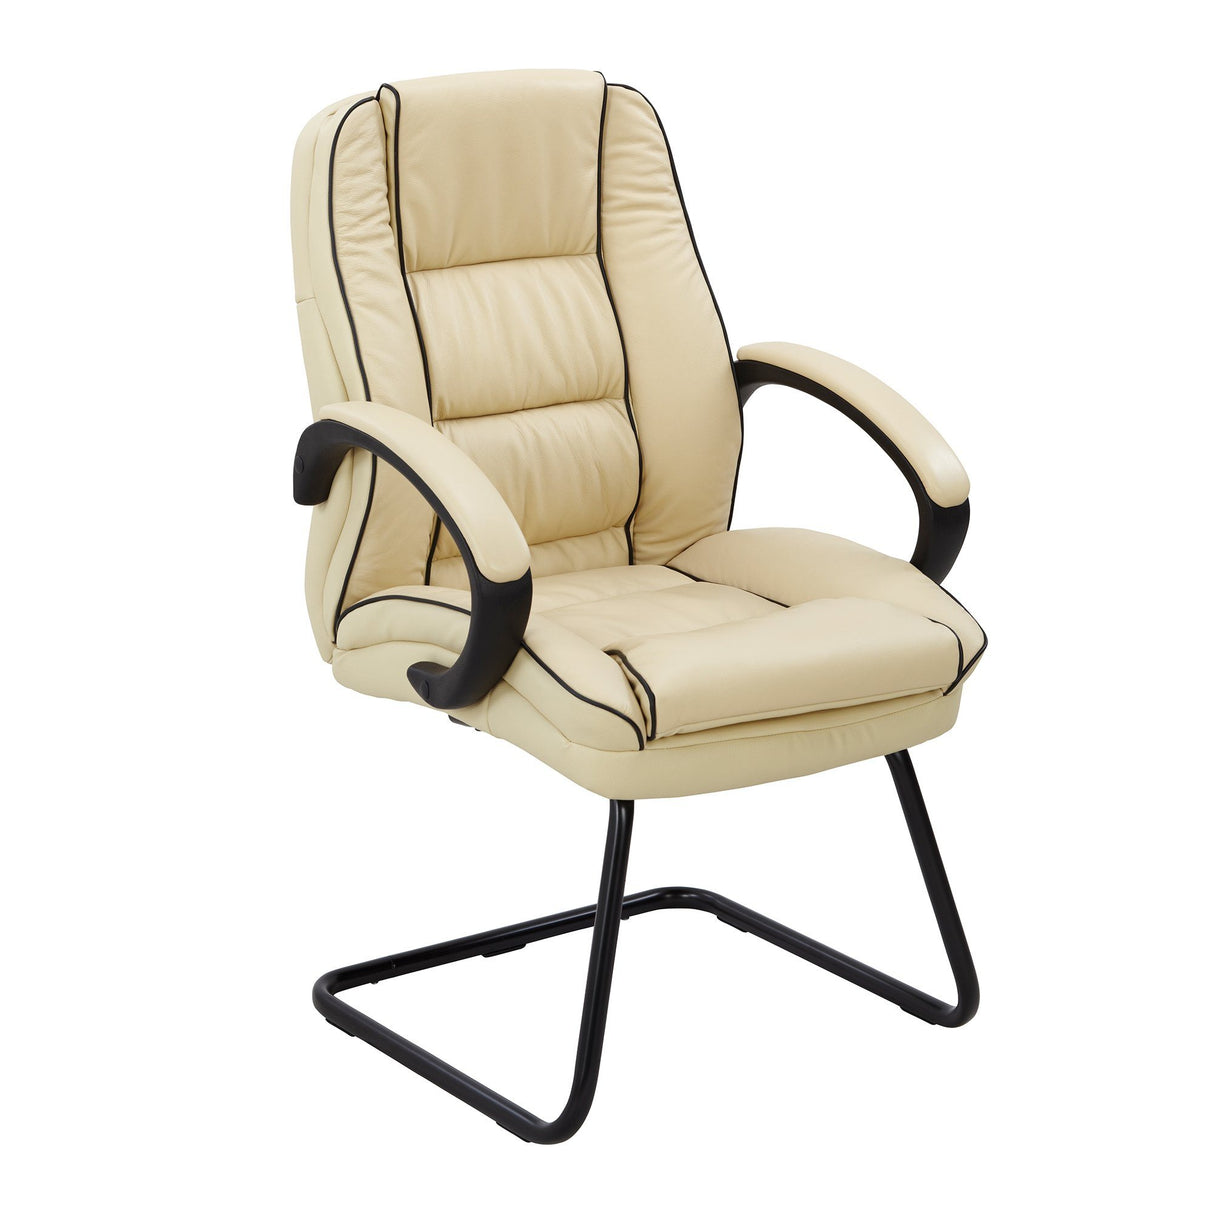 Nautilus Designs Truro Cantilever Framed Leather Faced visitor Armchair with Contrasting Piping - Cream